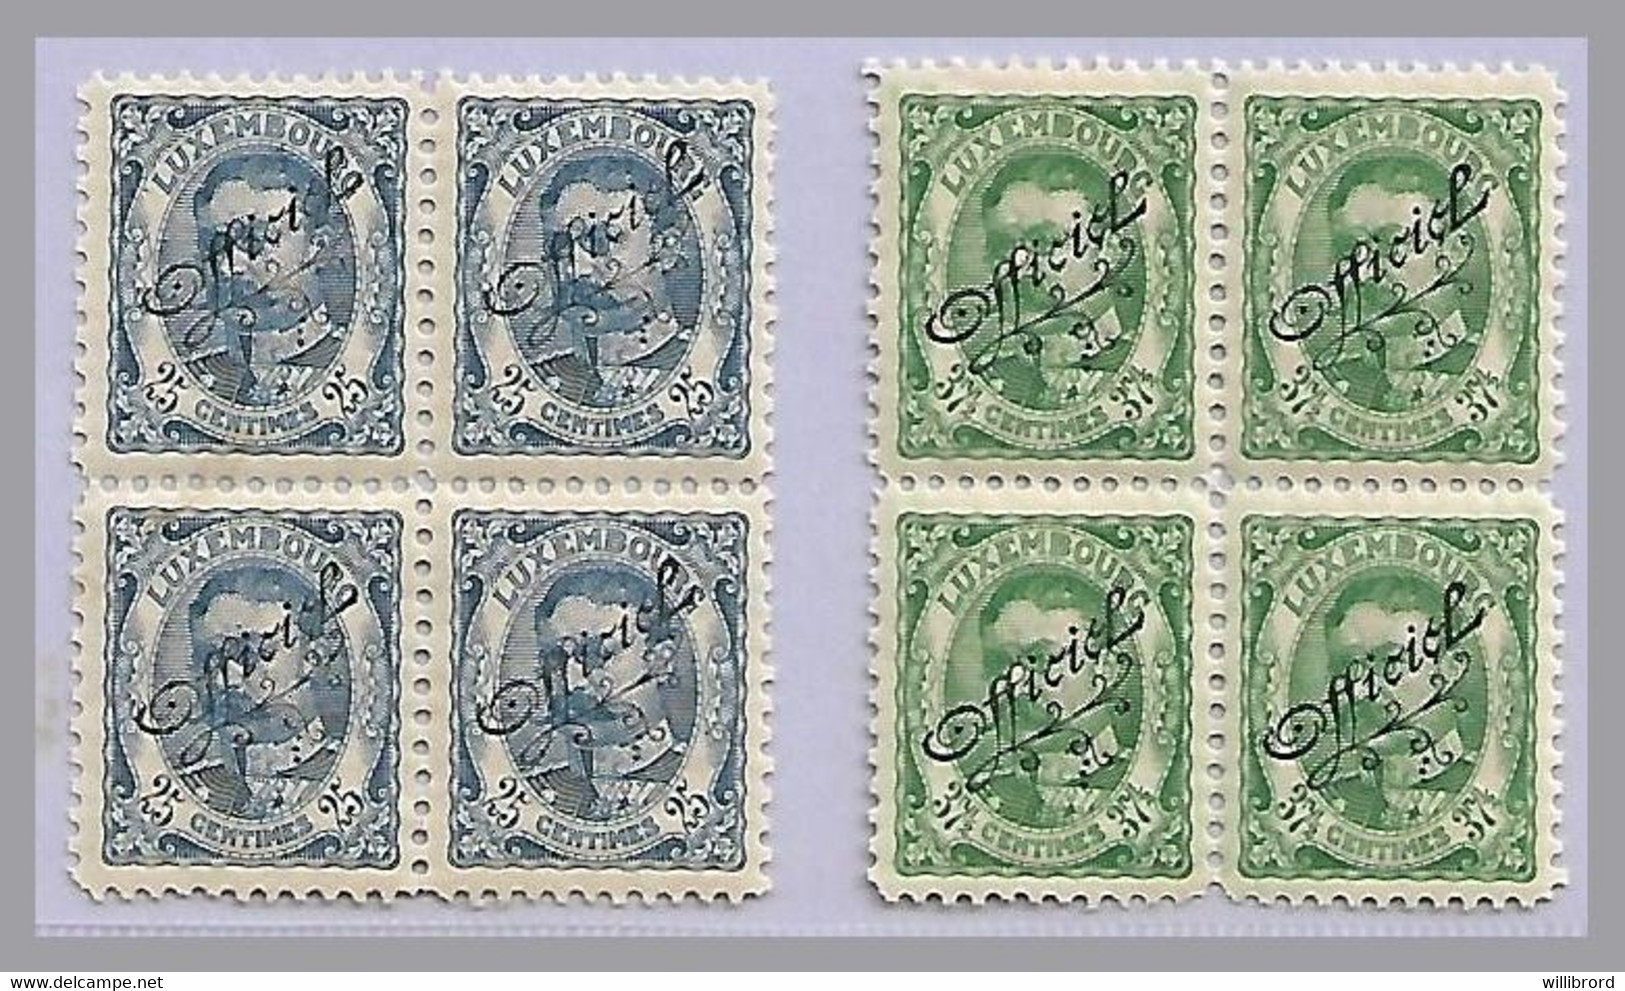 LUXEMBOURG - G.D. William IV OFFICIALS  - 25c & 37½c Blocks Of 4 - Mint Never Hinged - 1906 Guglielmo IV